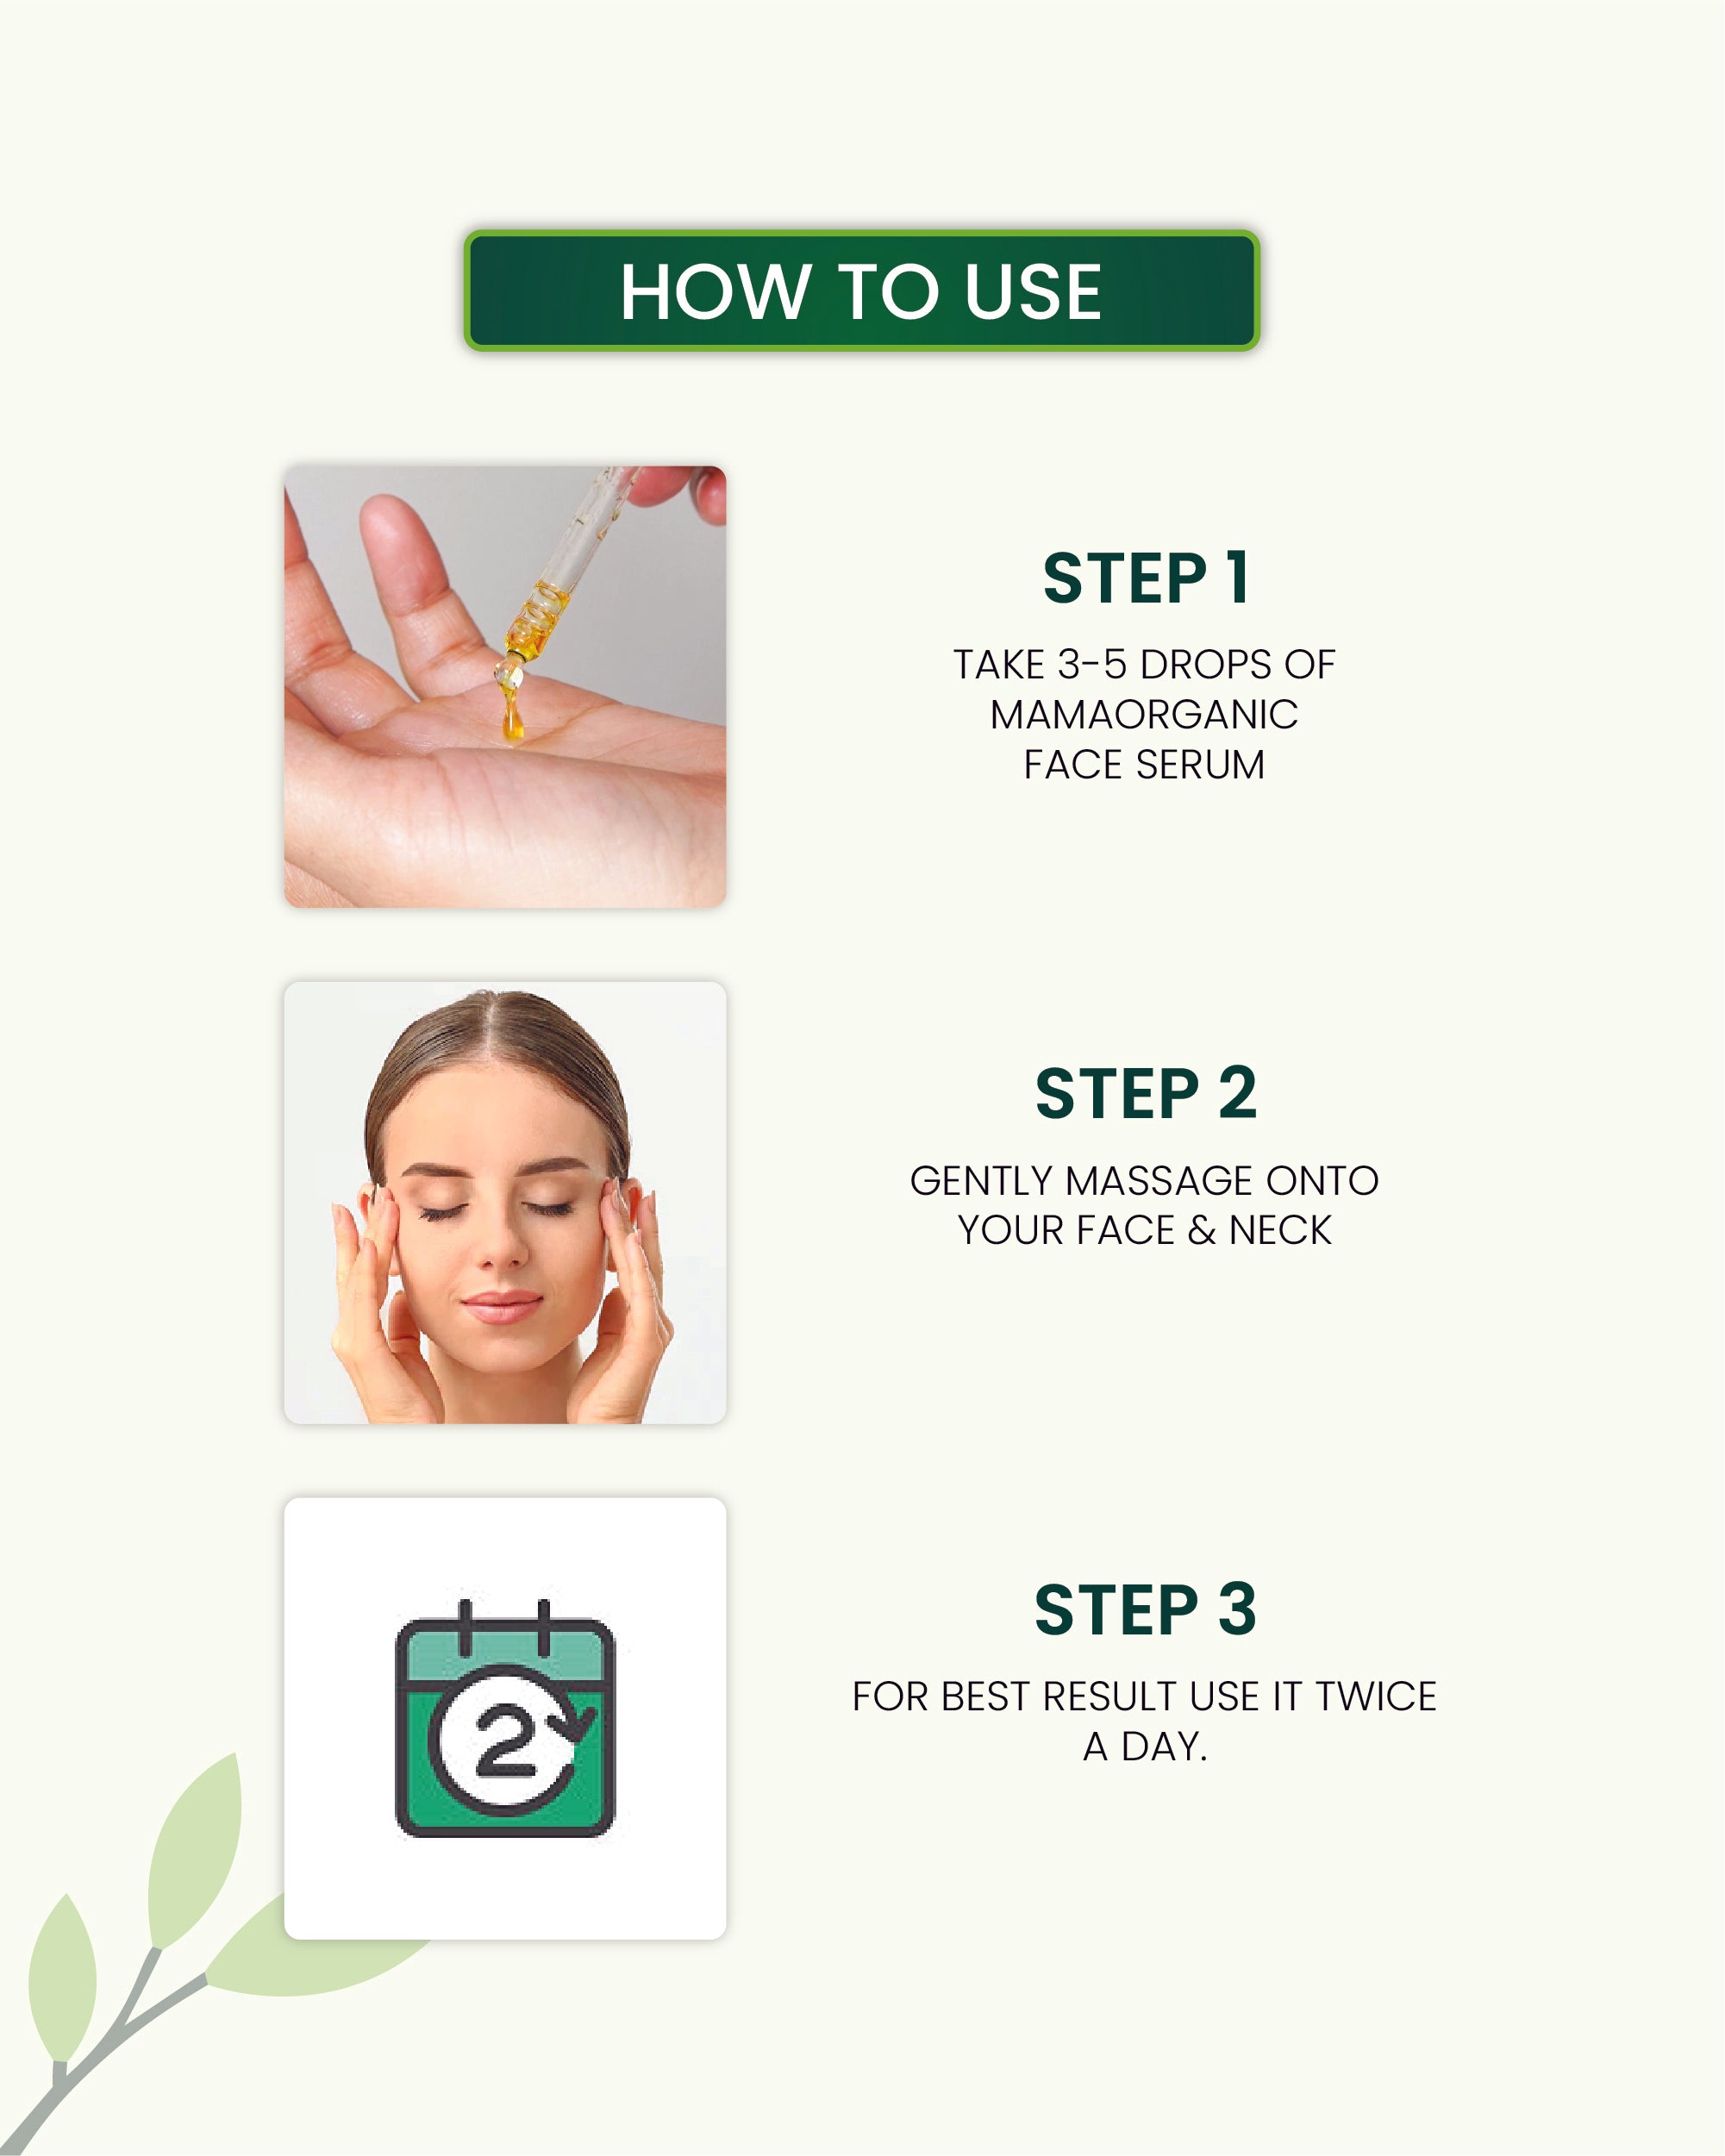 How to Use Hyaluronic Acid Face Serum